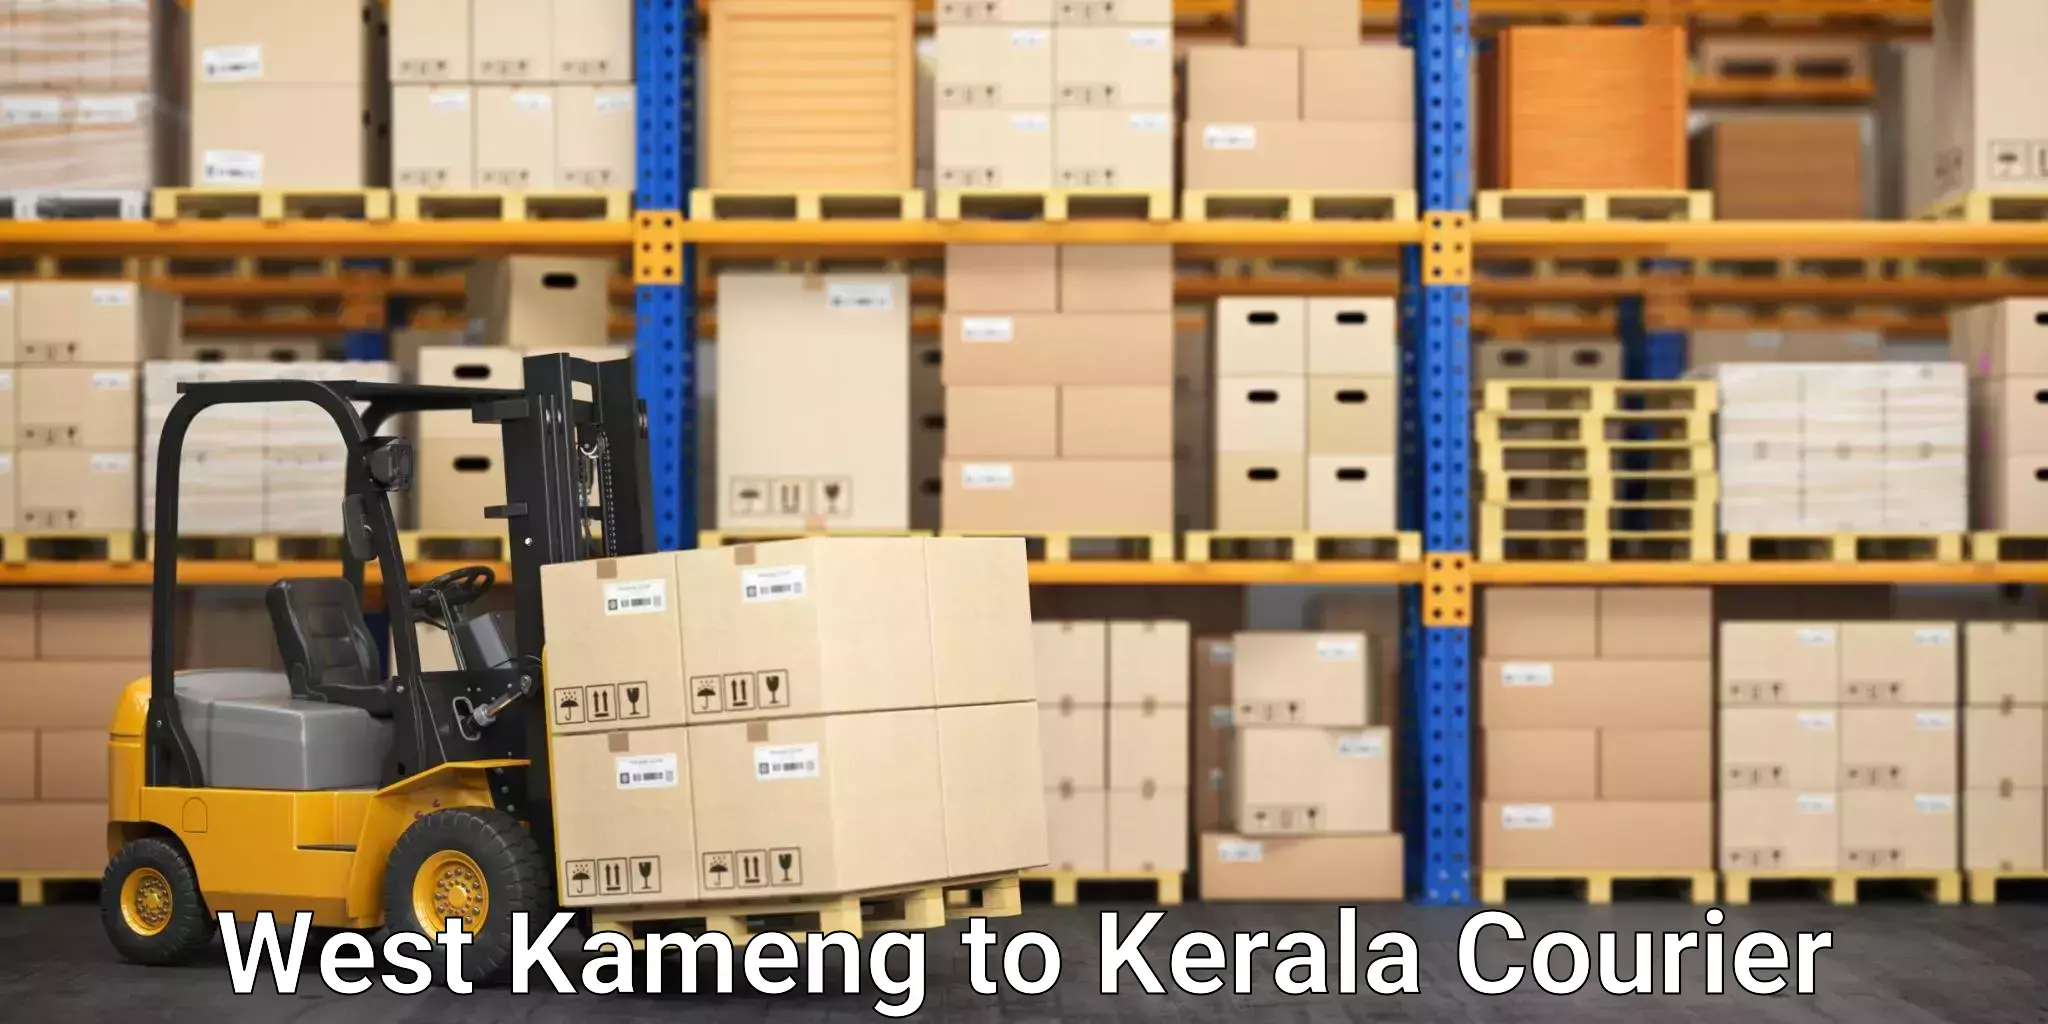 Nationwide shipping capabilities in West Kameng to Kottayam